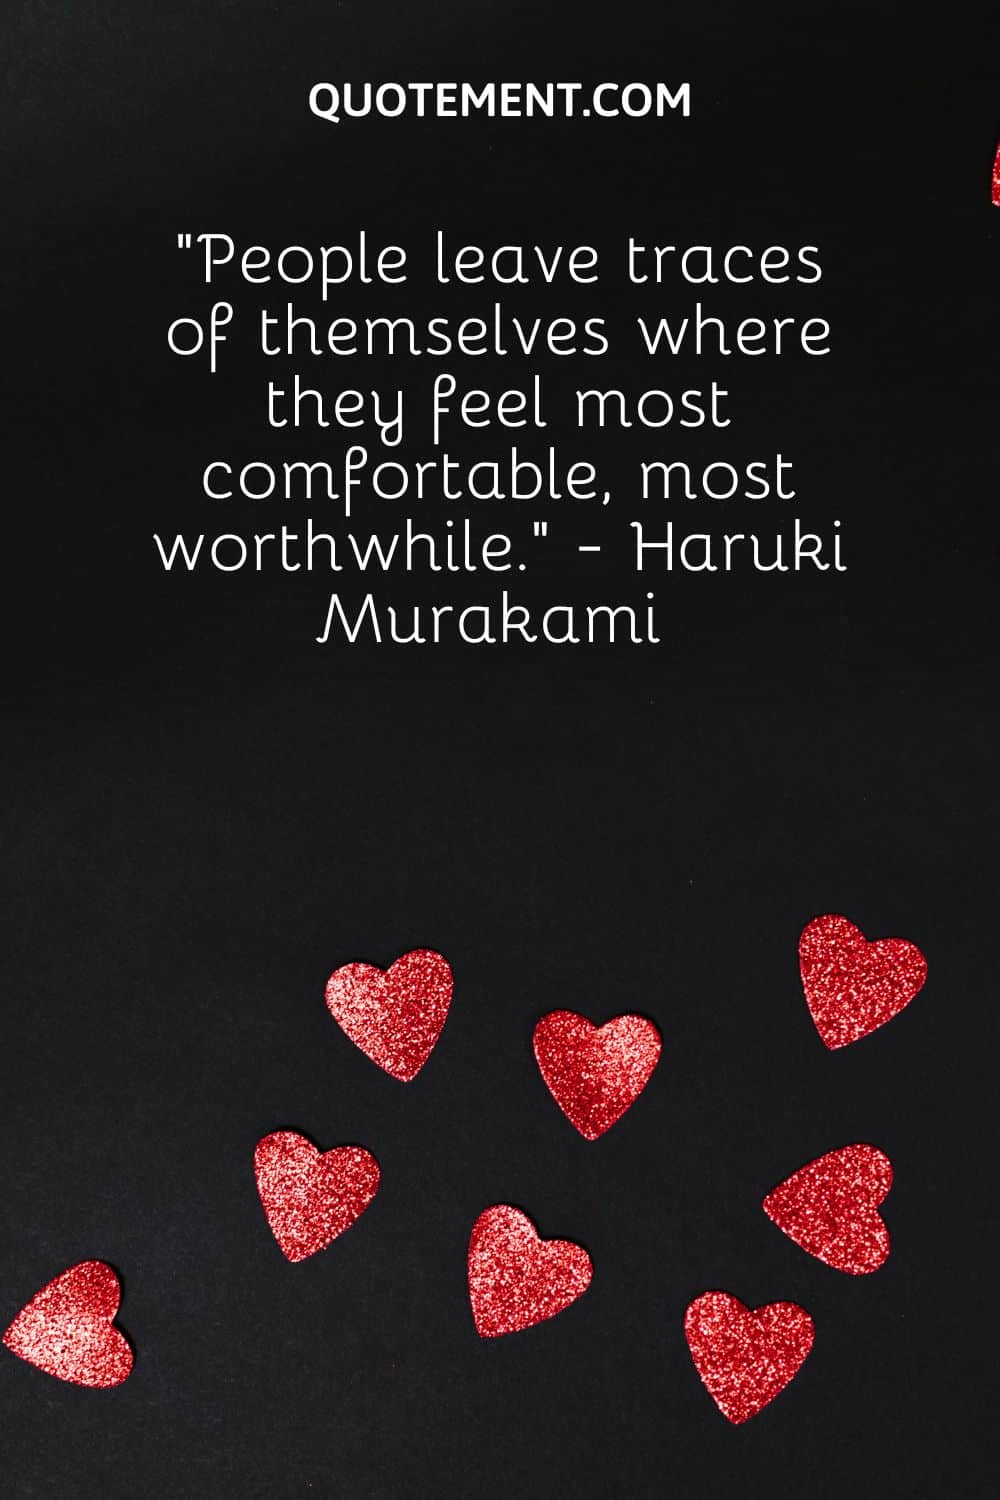 People leave traces of themselves where they feel most comfortable, most worthwhile.” - Haruki Murakami 